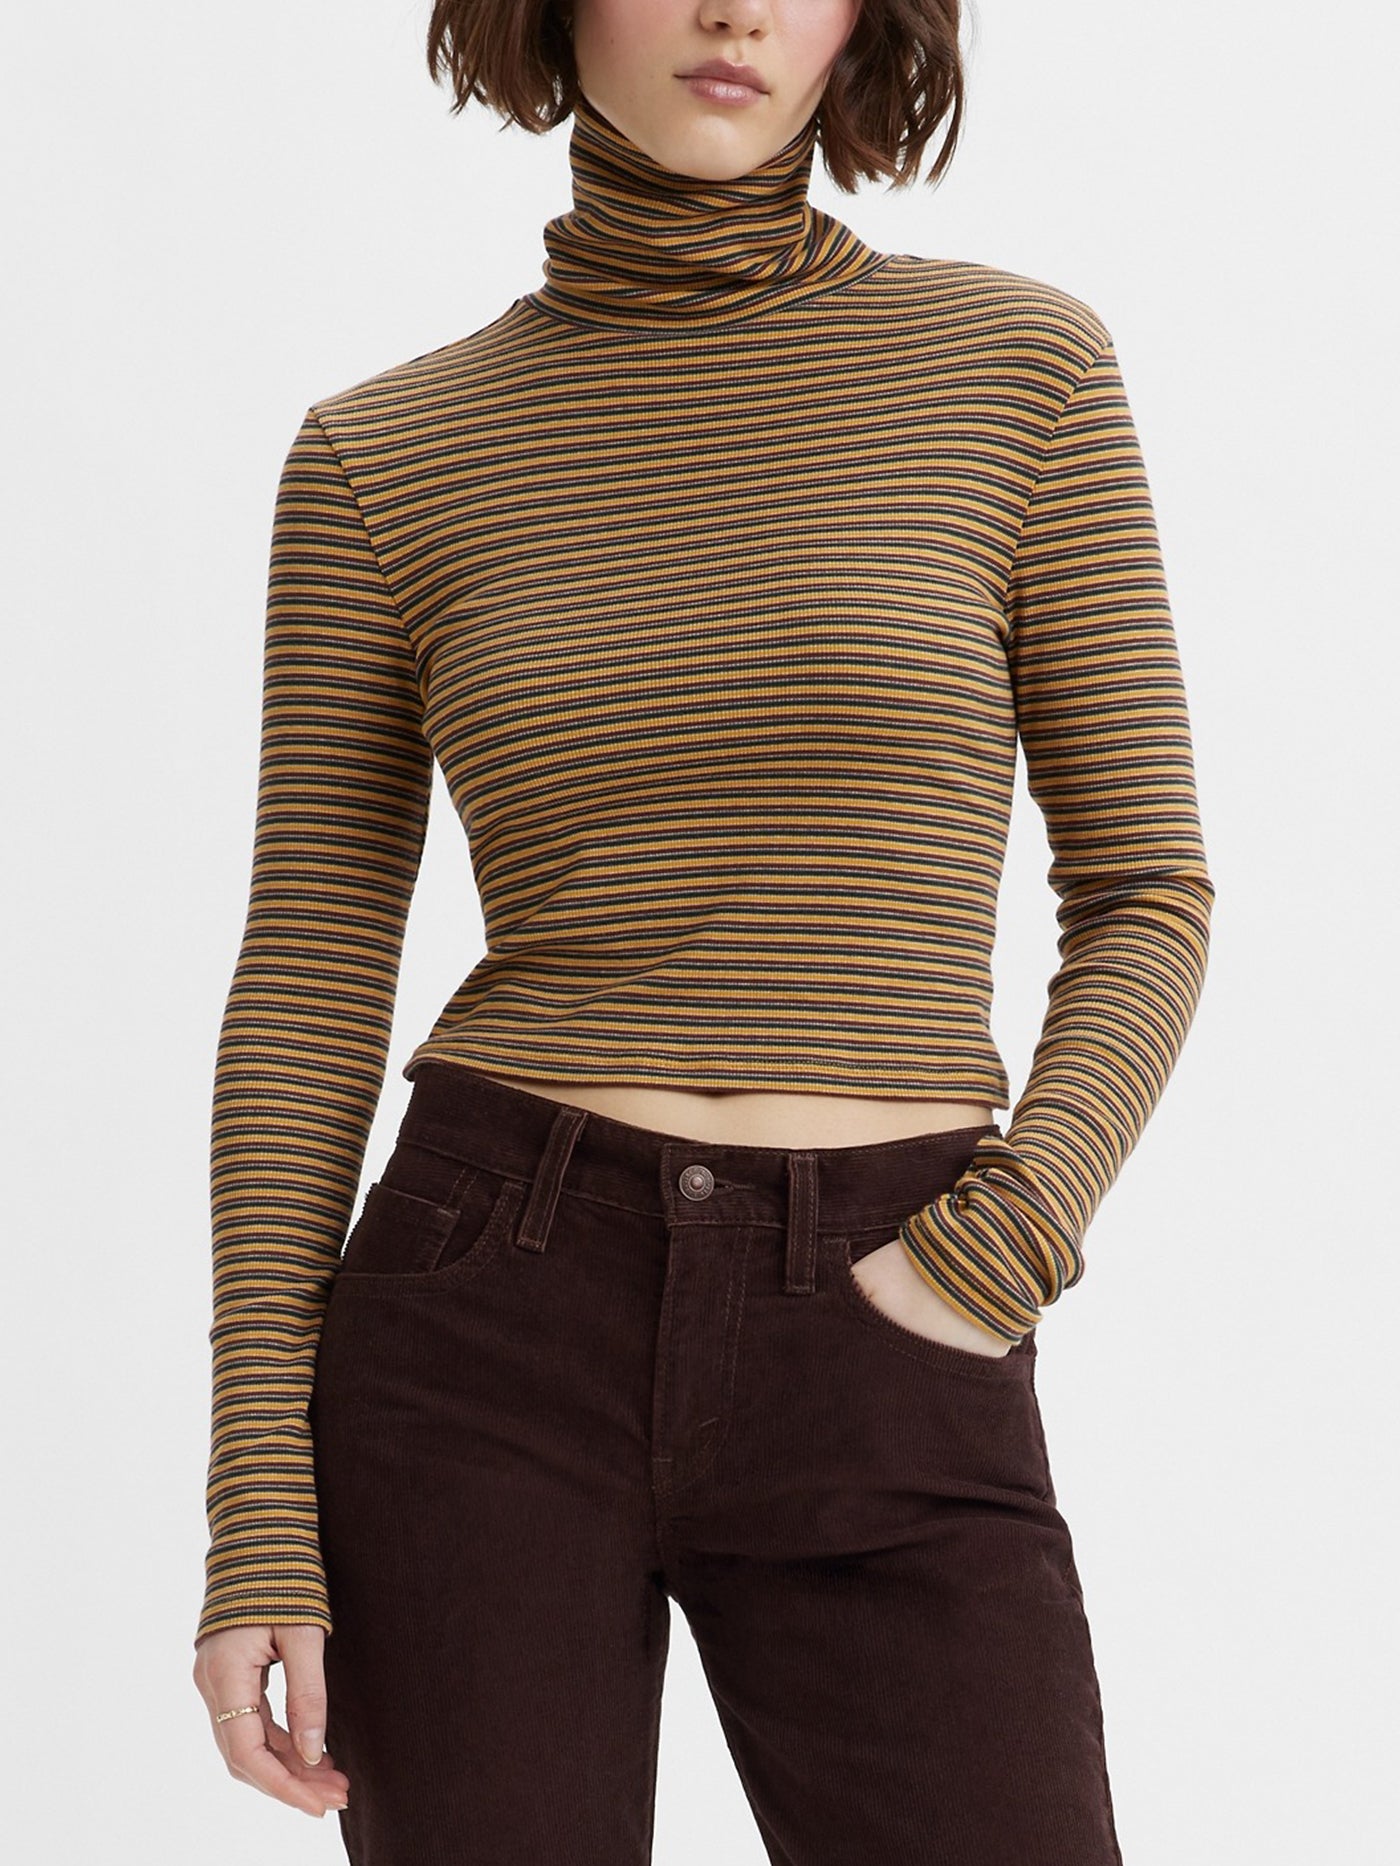 21 Long-Sleeve Tees and Turtlenecks to Layer With This Winter